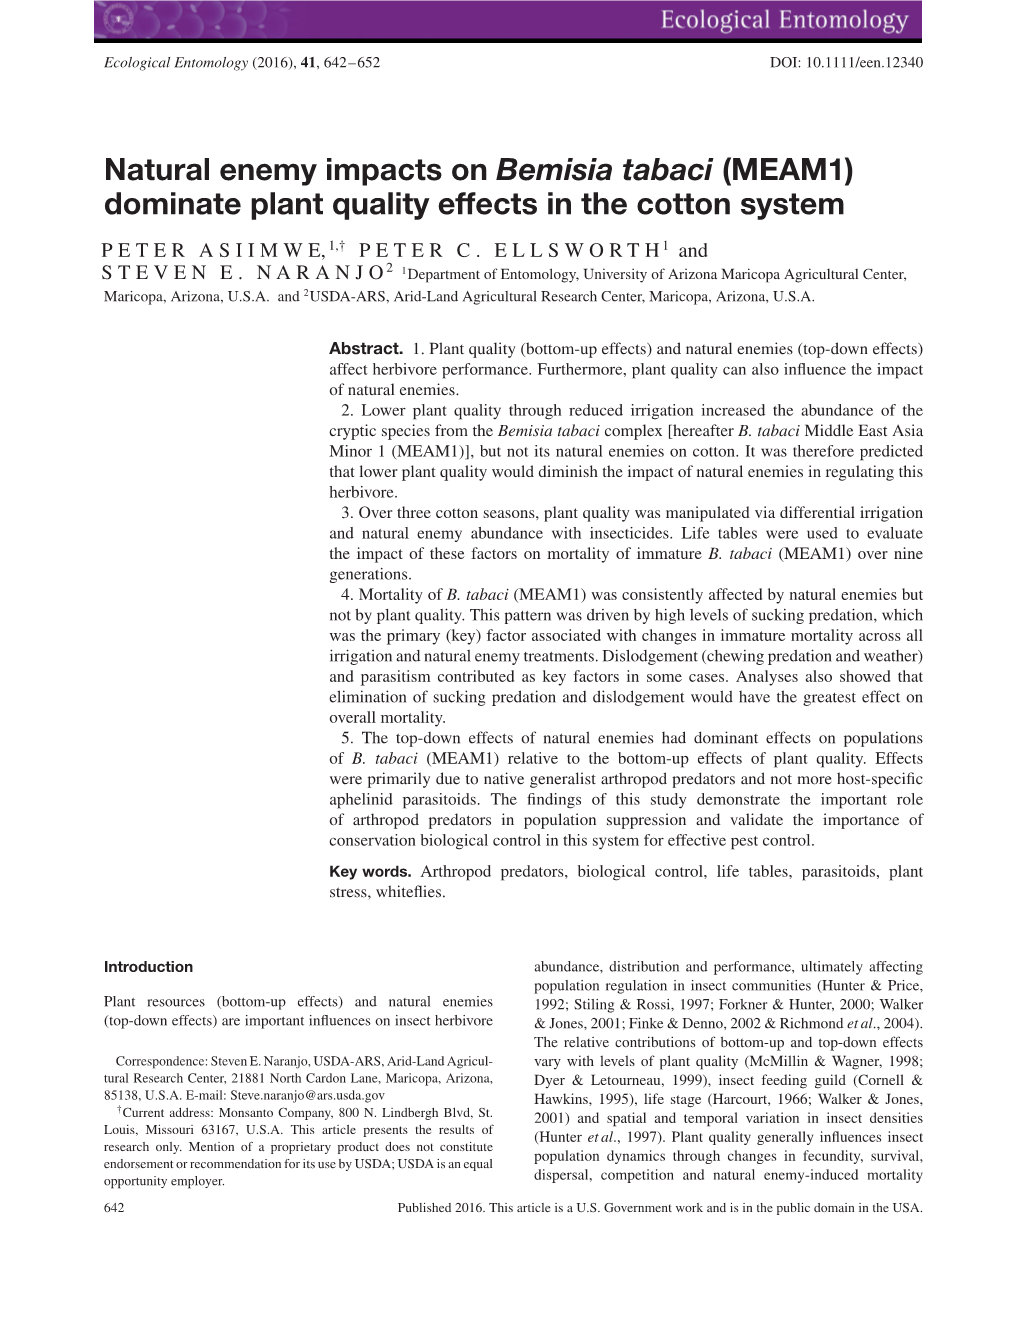 Natural Enemy Impacts on Bemisia Tabaci (MEAM1) Dominate Plant Quality Effects in the Cotton System